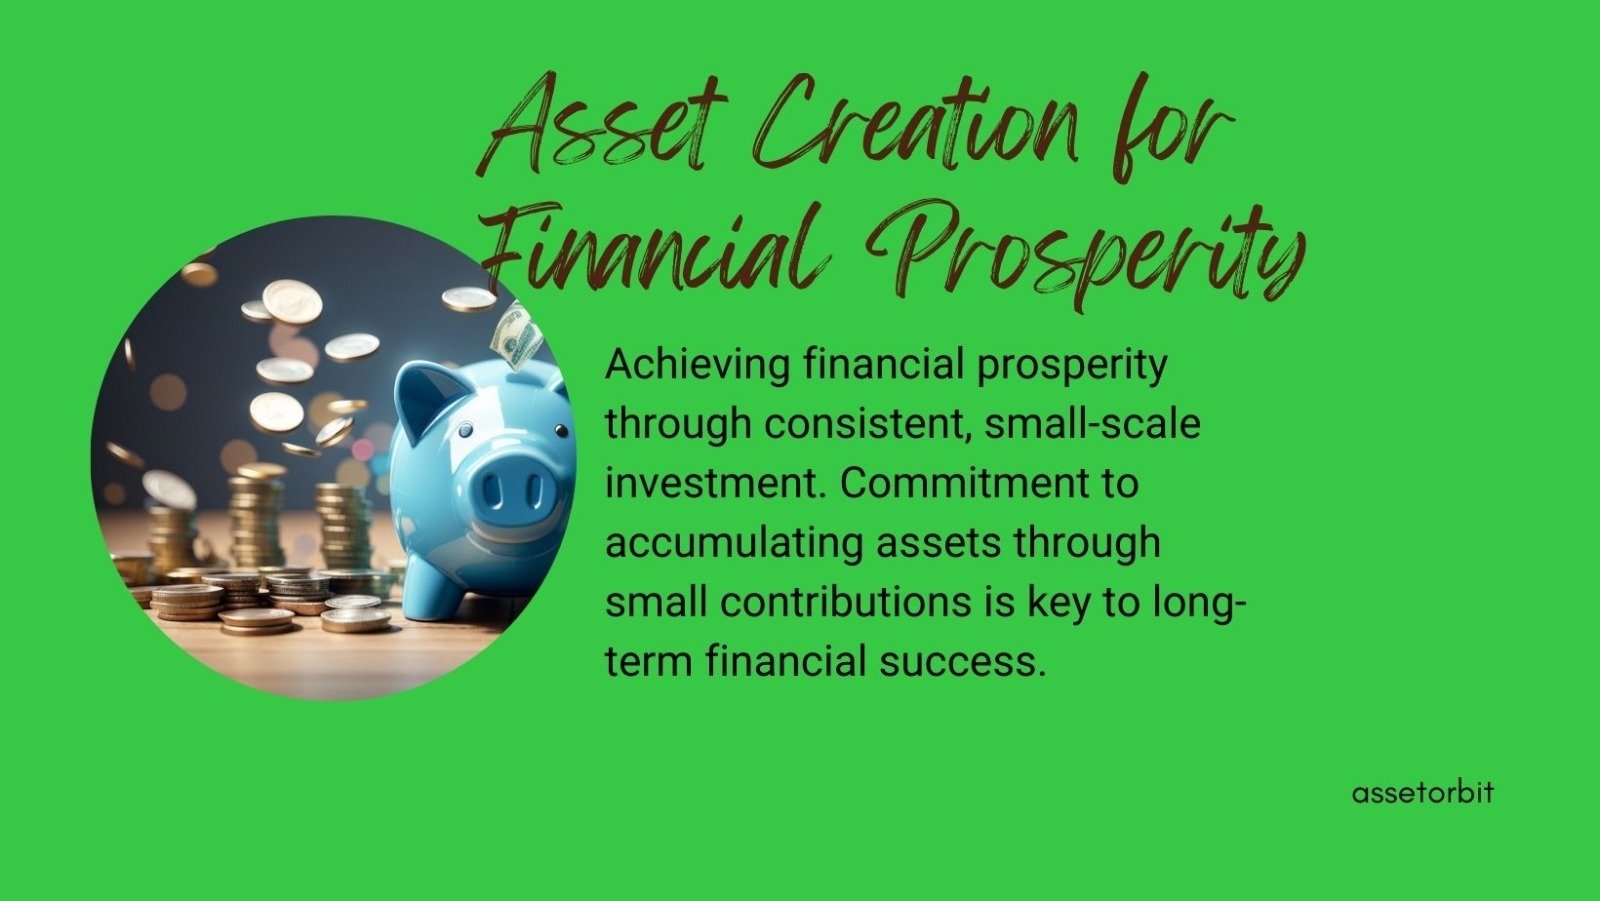 A Comprehensive Guide to Strategic Asset Creation for Financial Prosperity and Long-Term Success